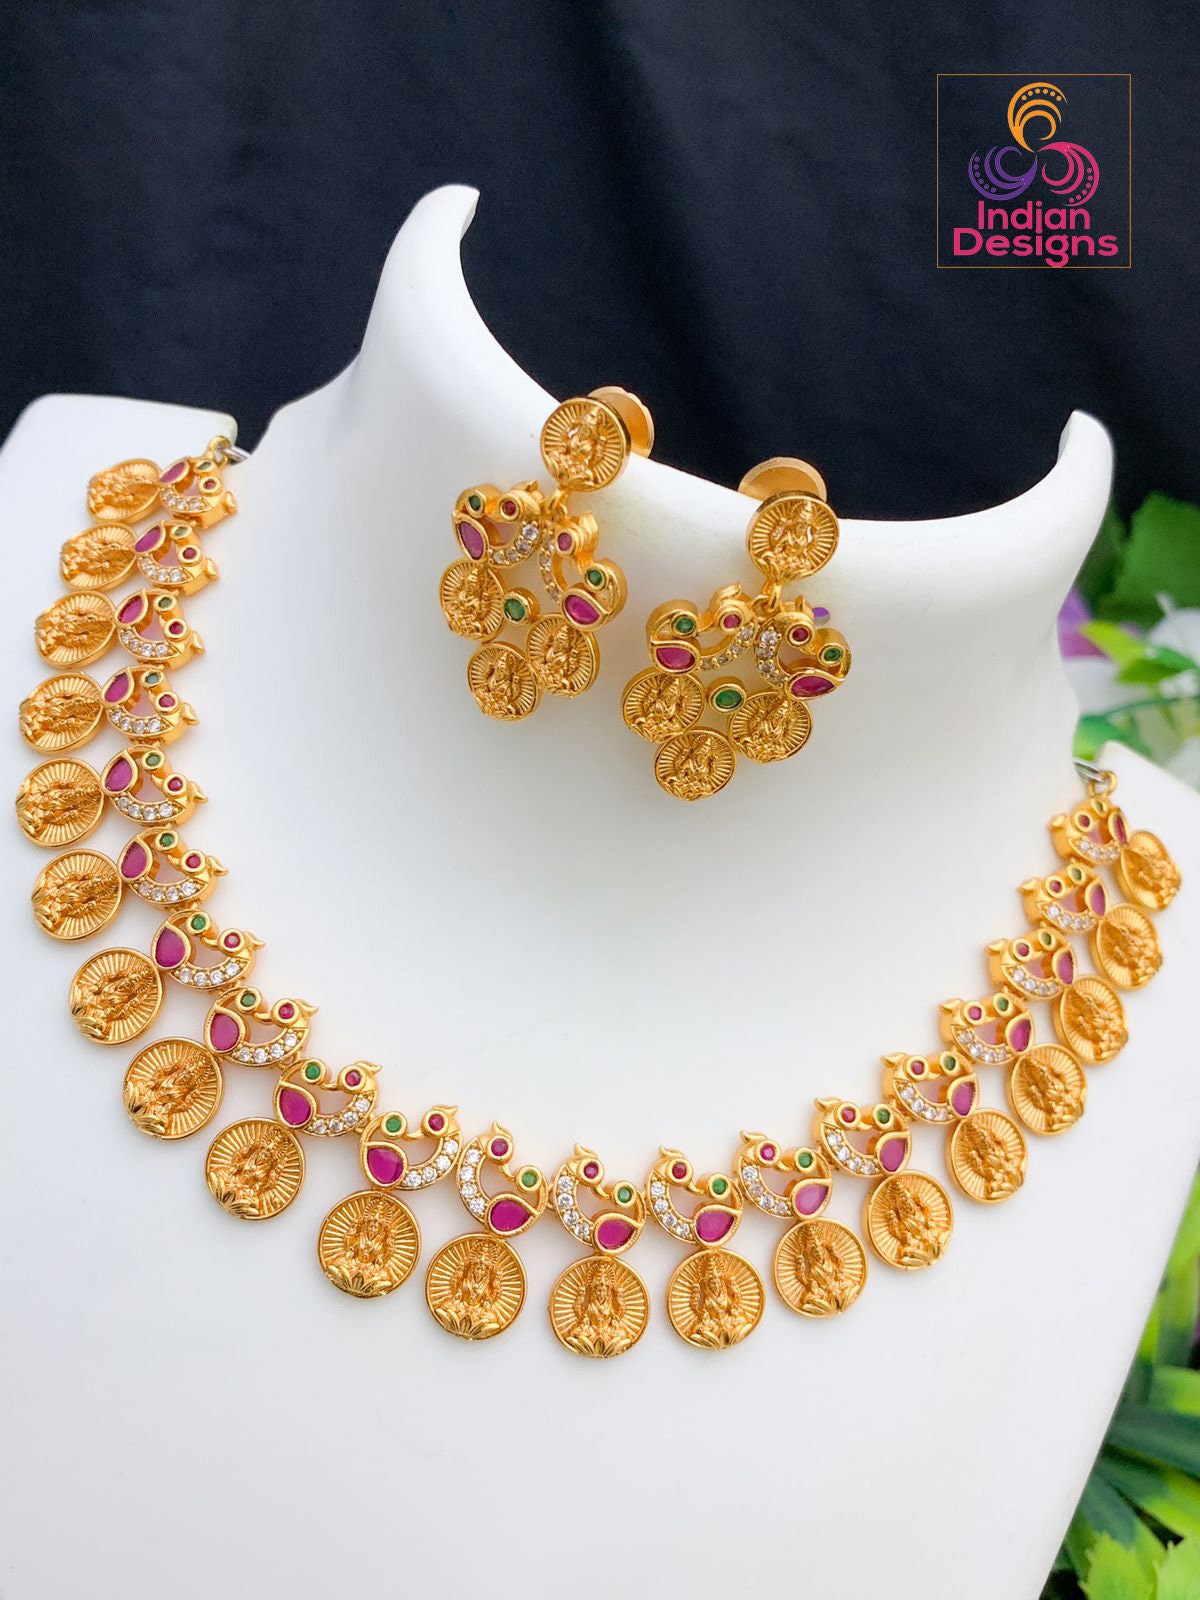 Matte Finish South indian Lakshmi coin necklace | One gram gold necklace latest jewelry designs | Temple jewelry gold Plated necklace design